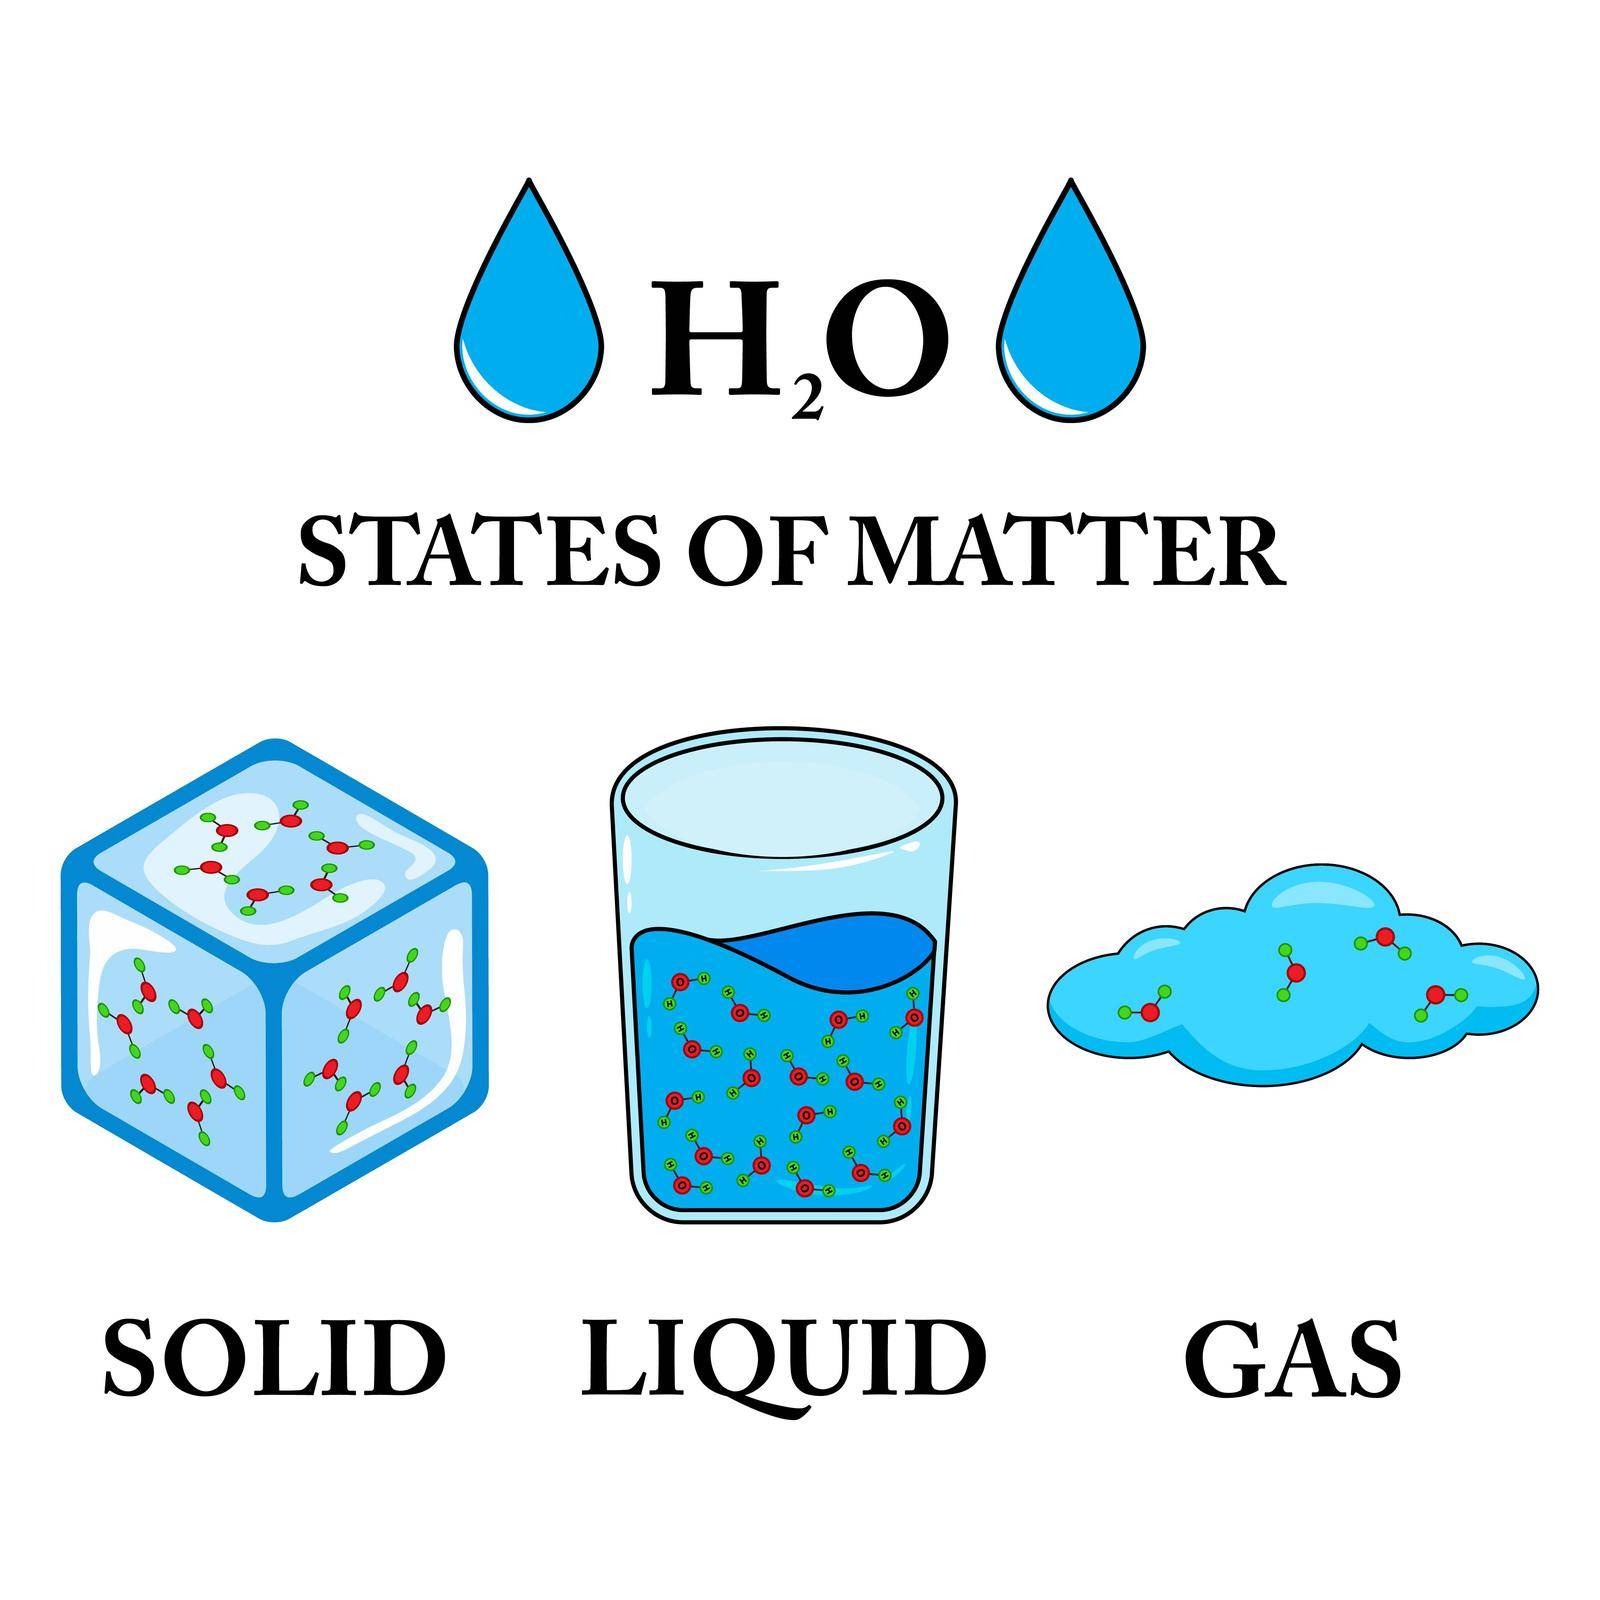 Vector illustration of the three states of matter, matter in different states. Scientific illustration of solid, liquid, gas states with different molecular arrangements isolated on white background. by wektorygrafika